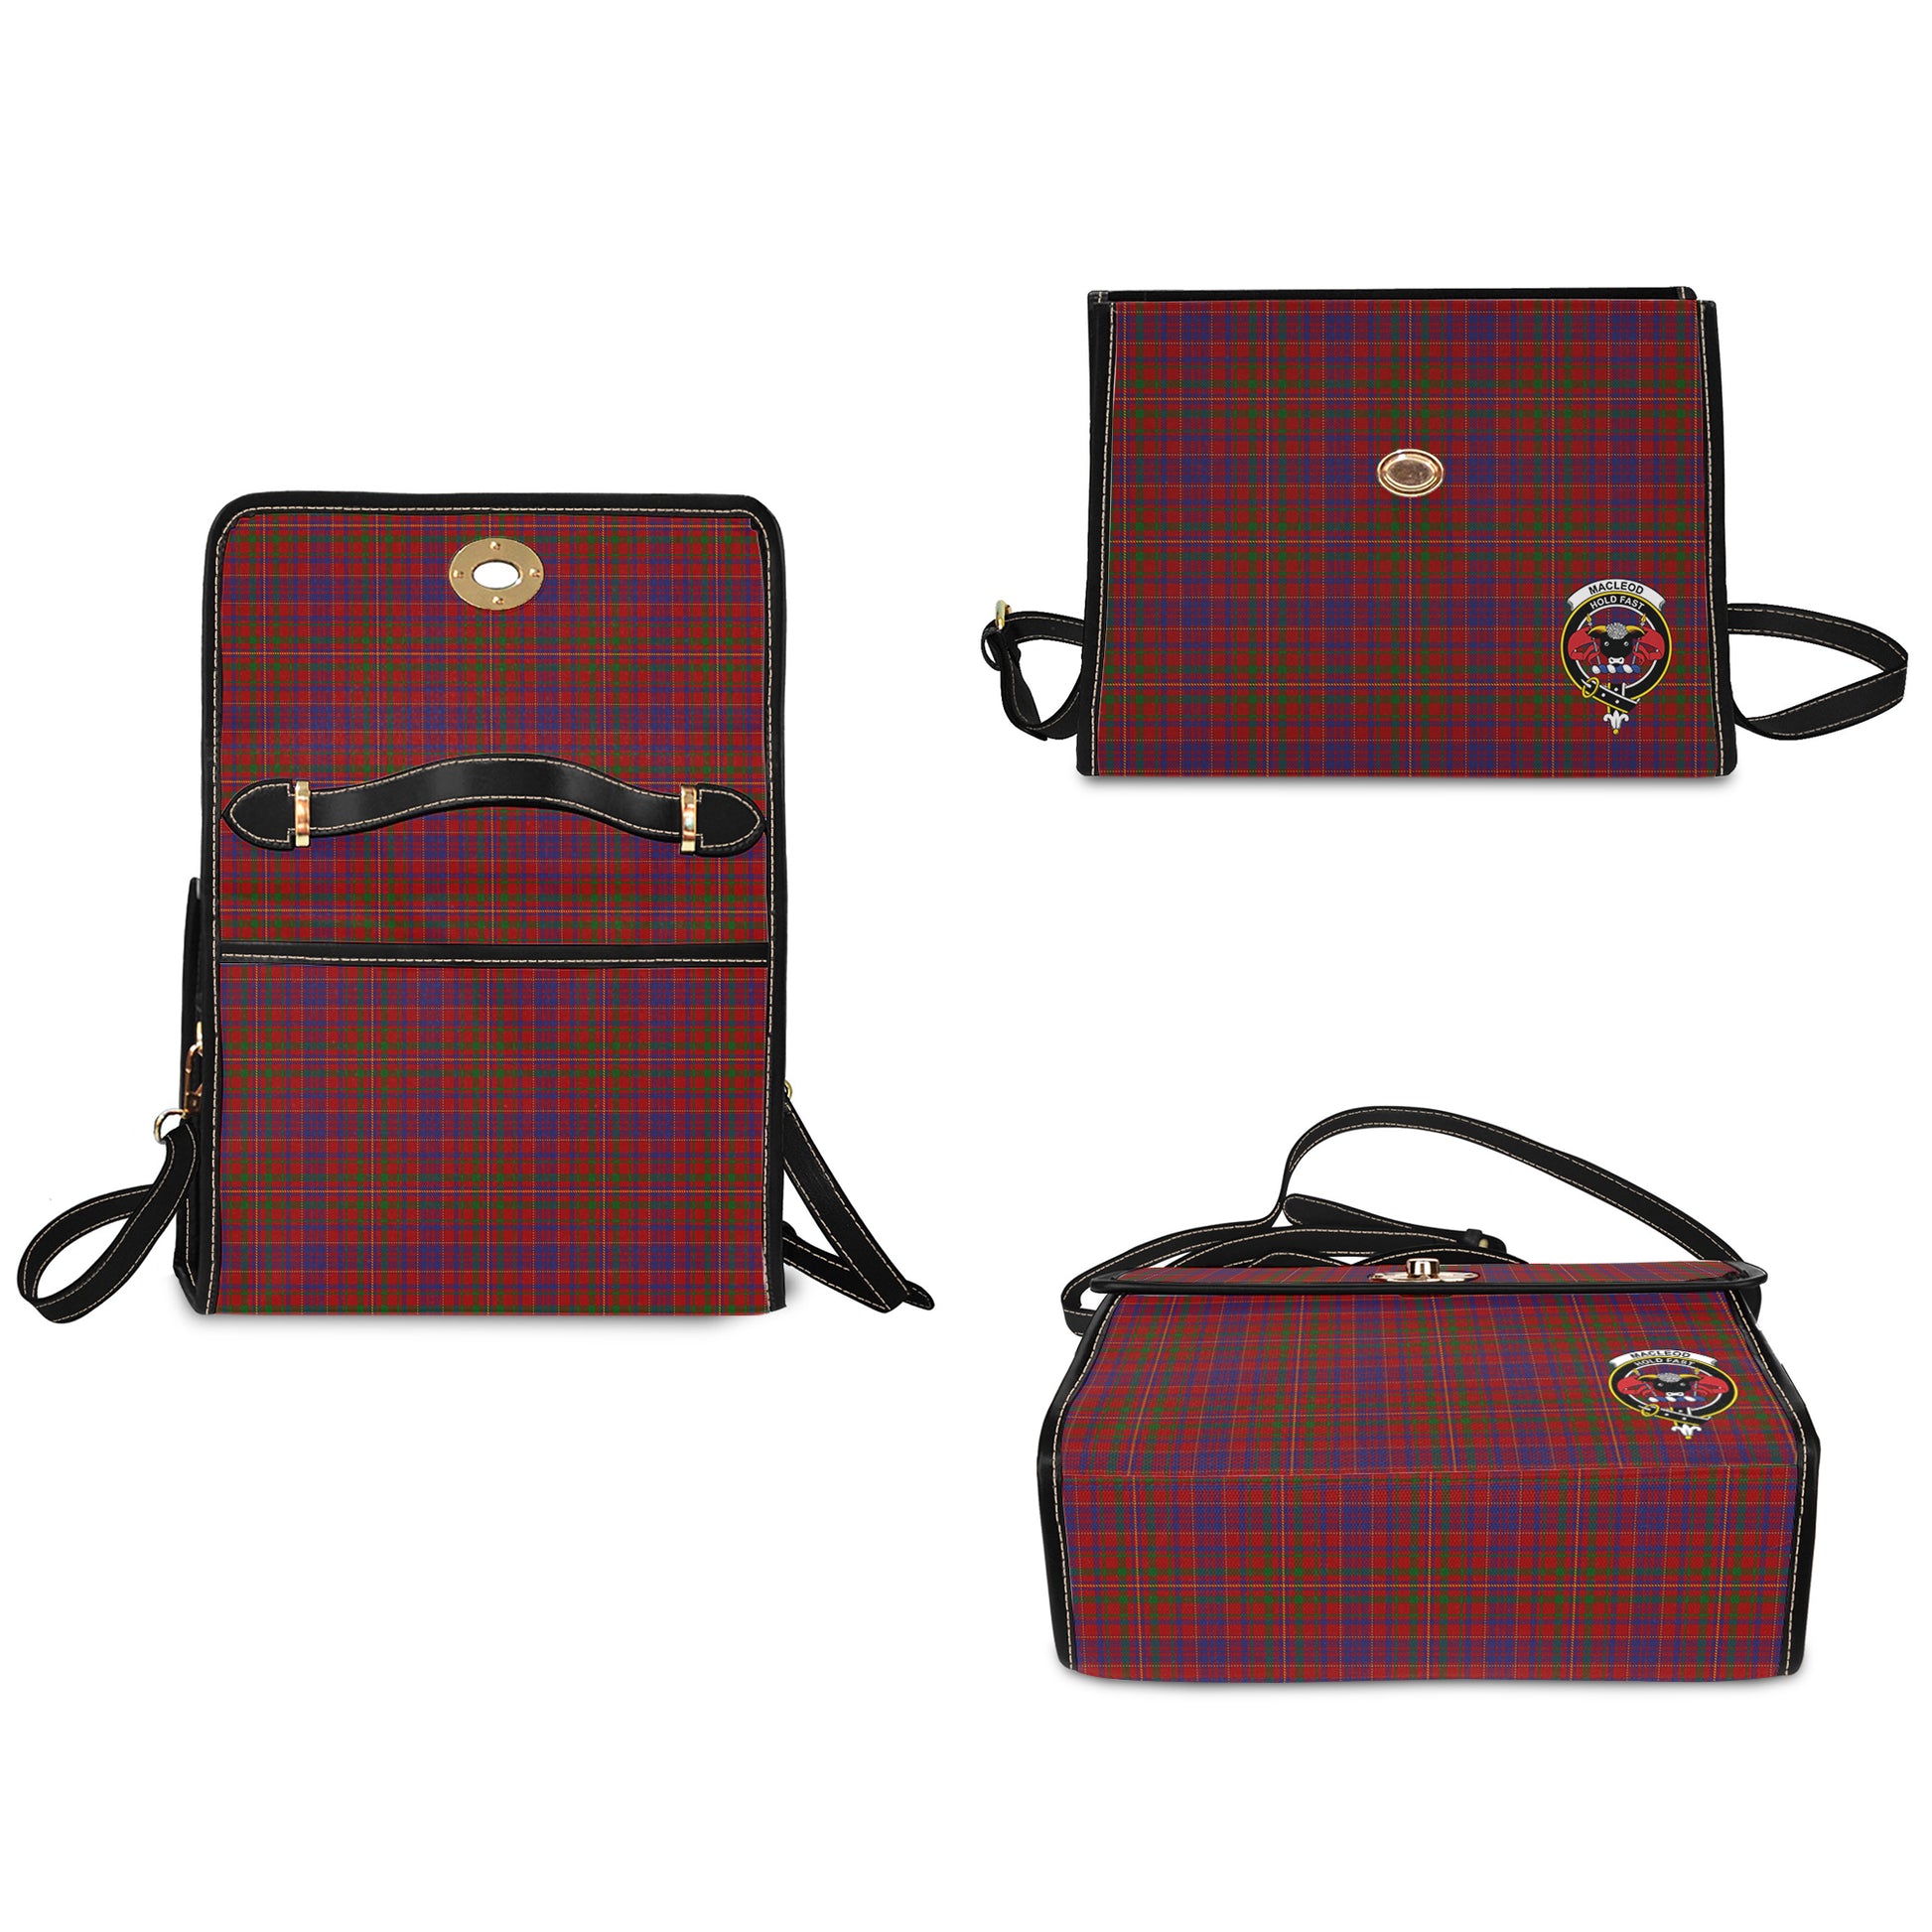 macleod-red-tartan-leather-strap-waterproof-canvas-bag-with-family-crest